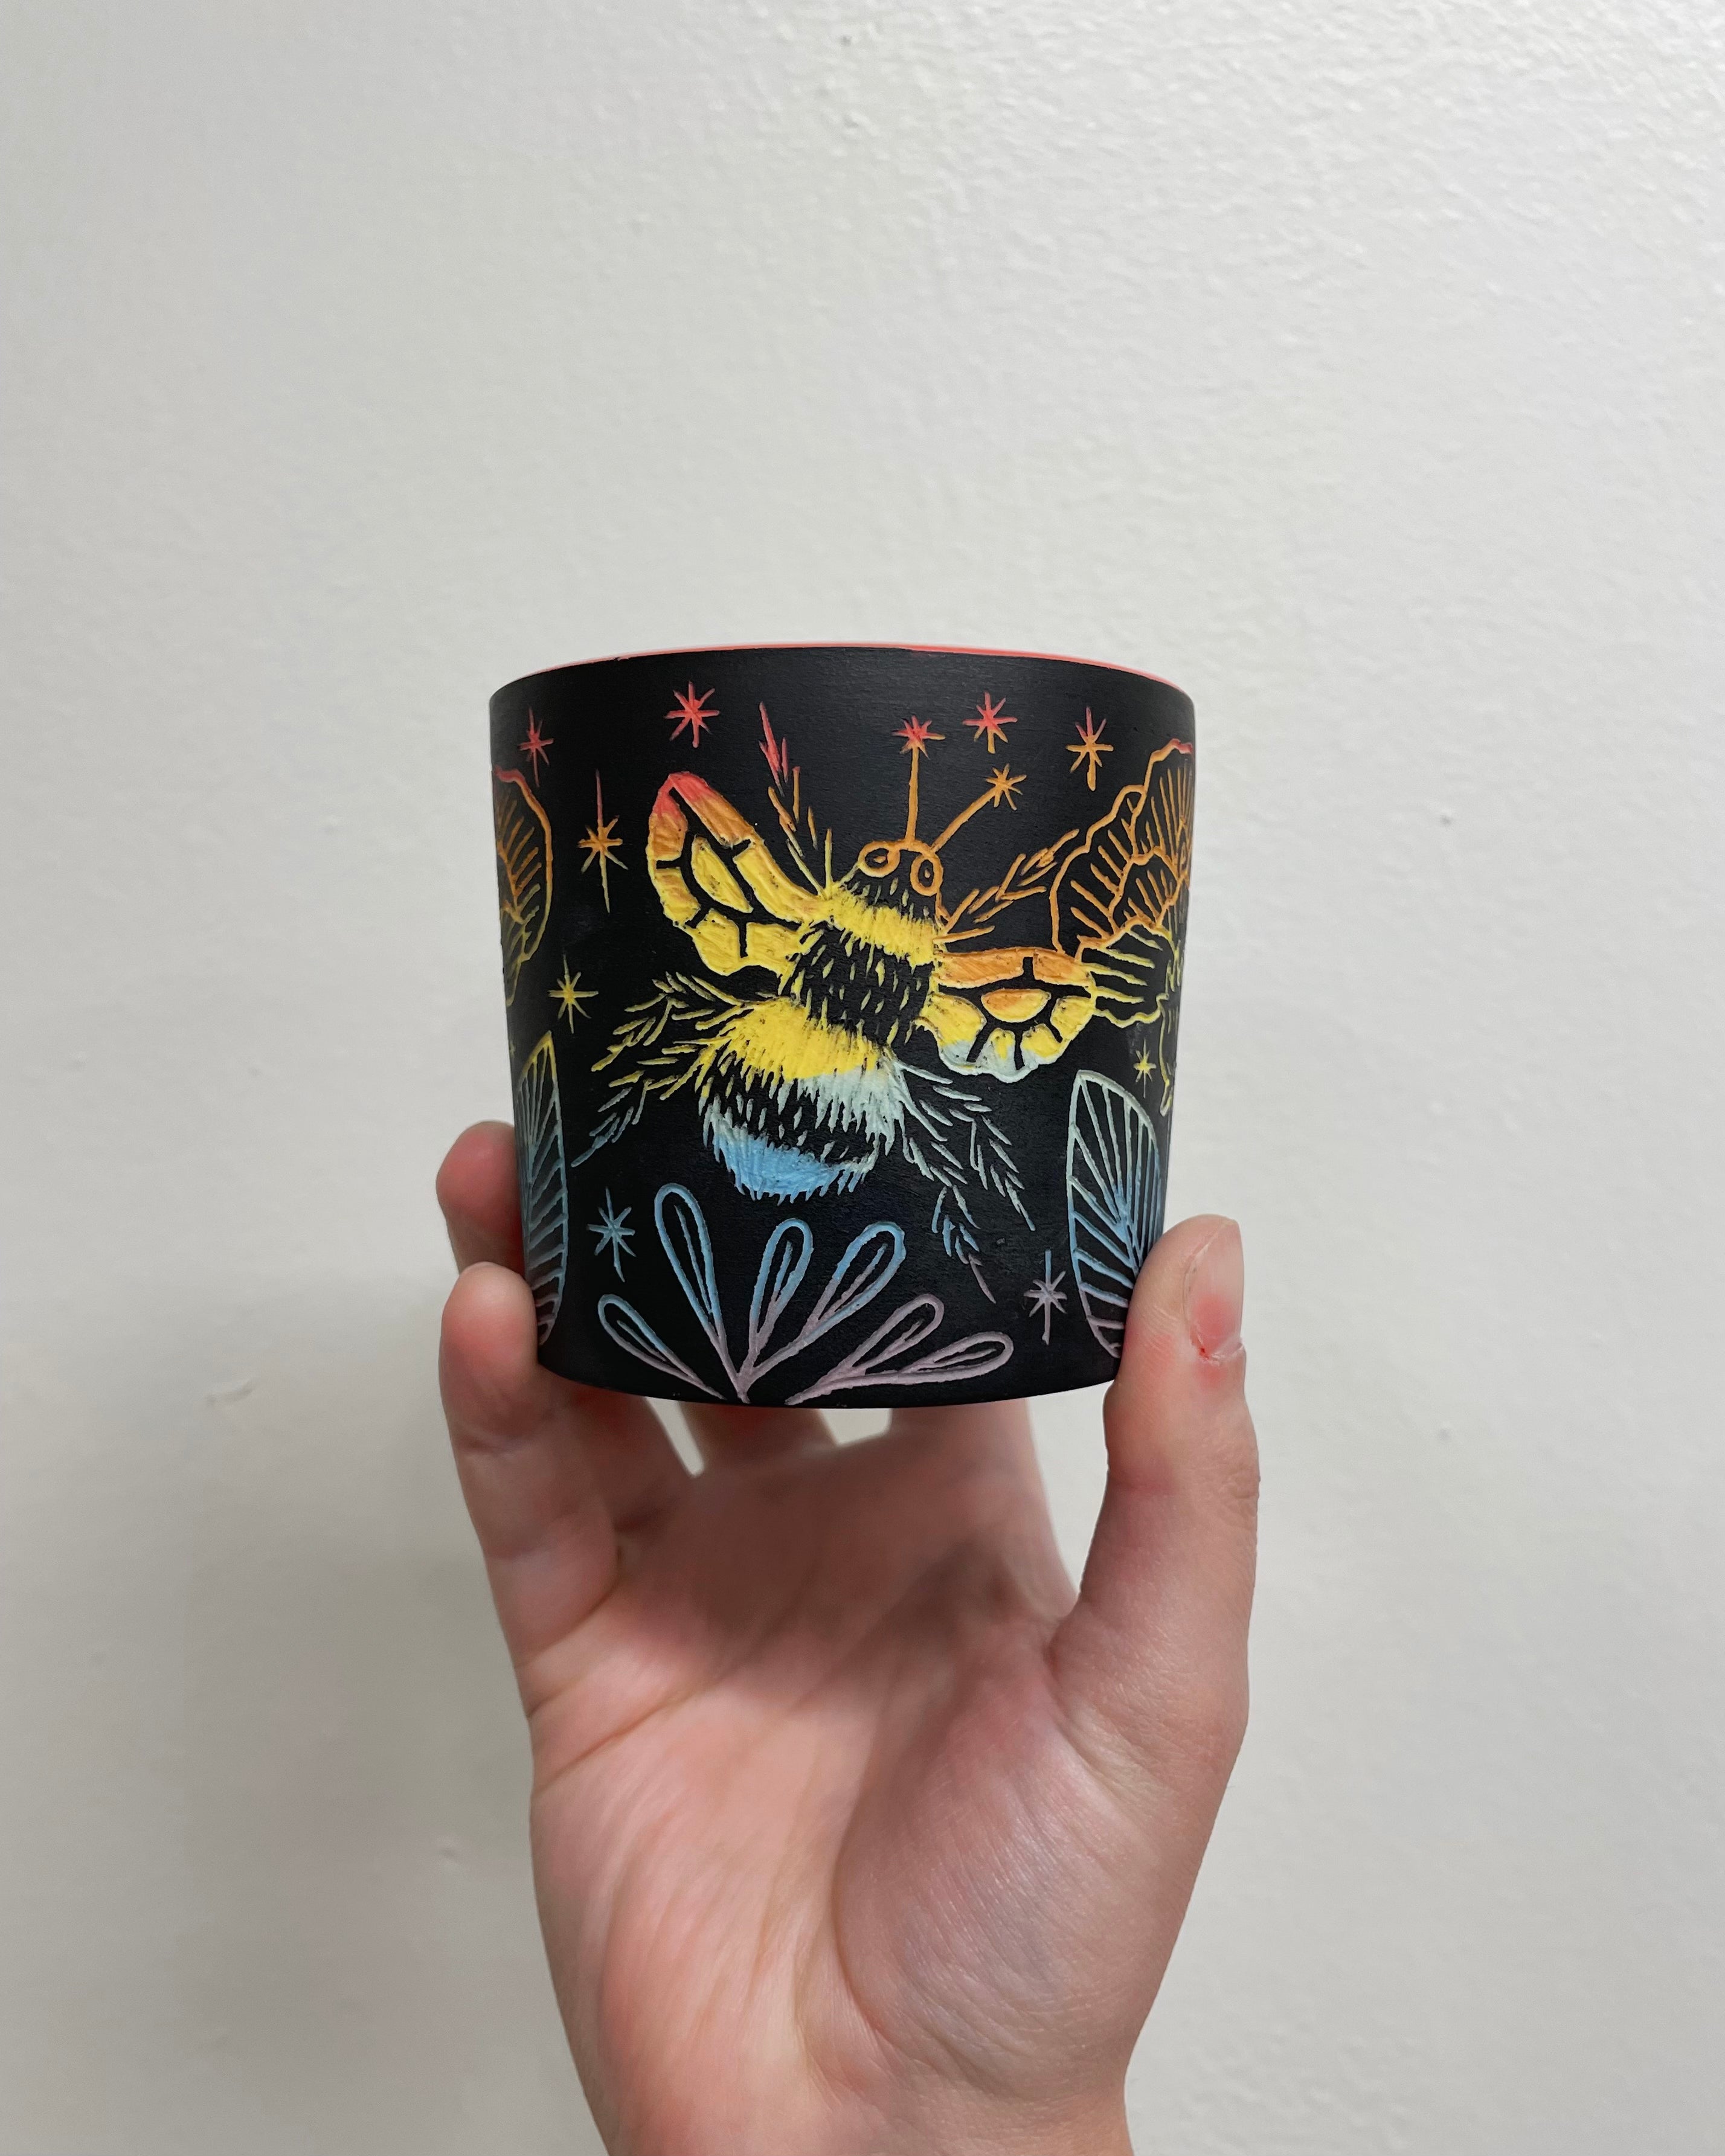 RAINBOW Bees and Flowers Sgraffito Tumbler Porcelain (by Katie Kelly)